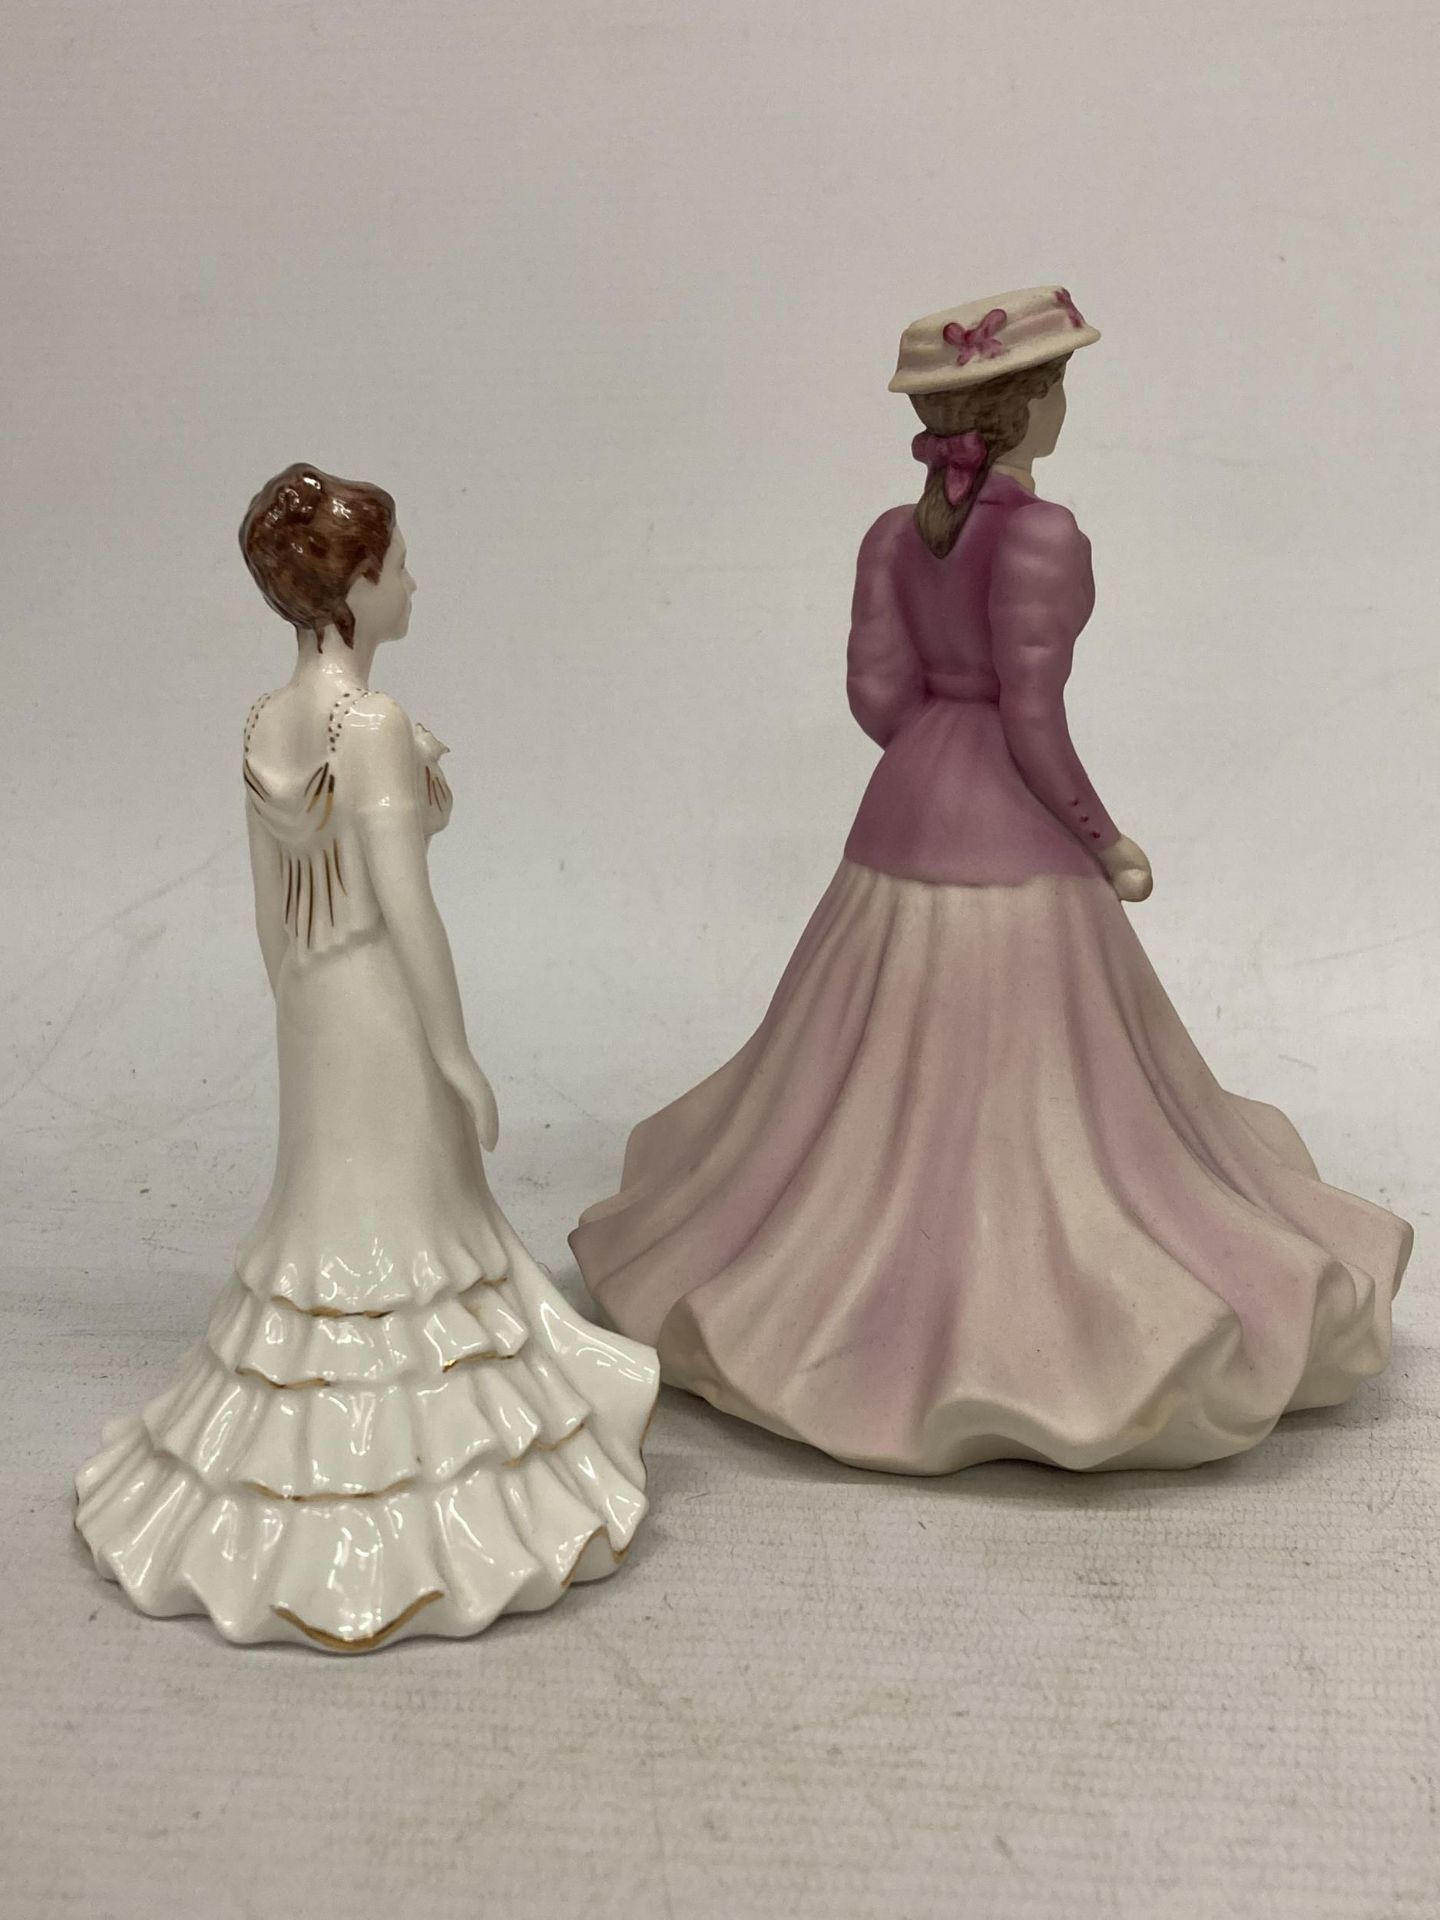 TWO COALPORT FIGURINES "CRYSTAL" AND "BEAU MONDE ON COURT" - Image 2 of 4